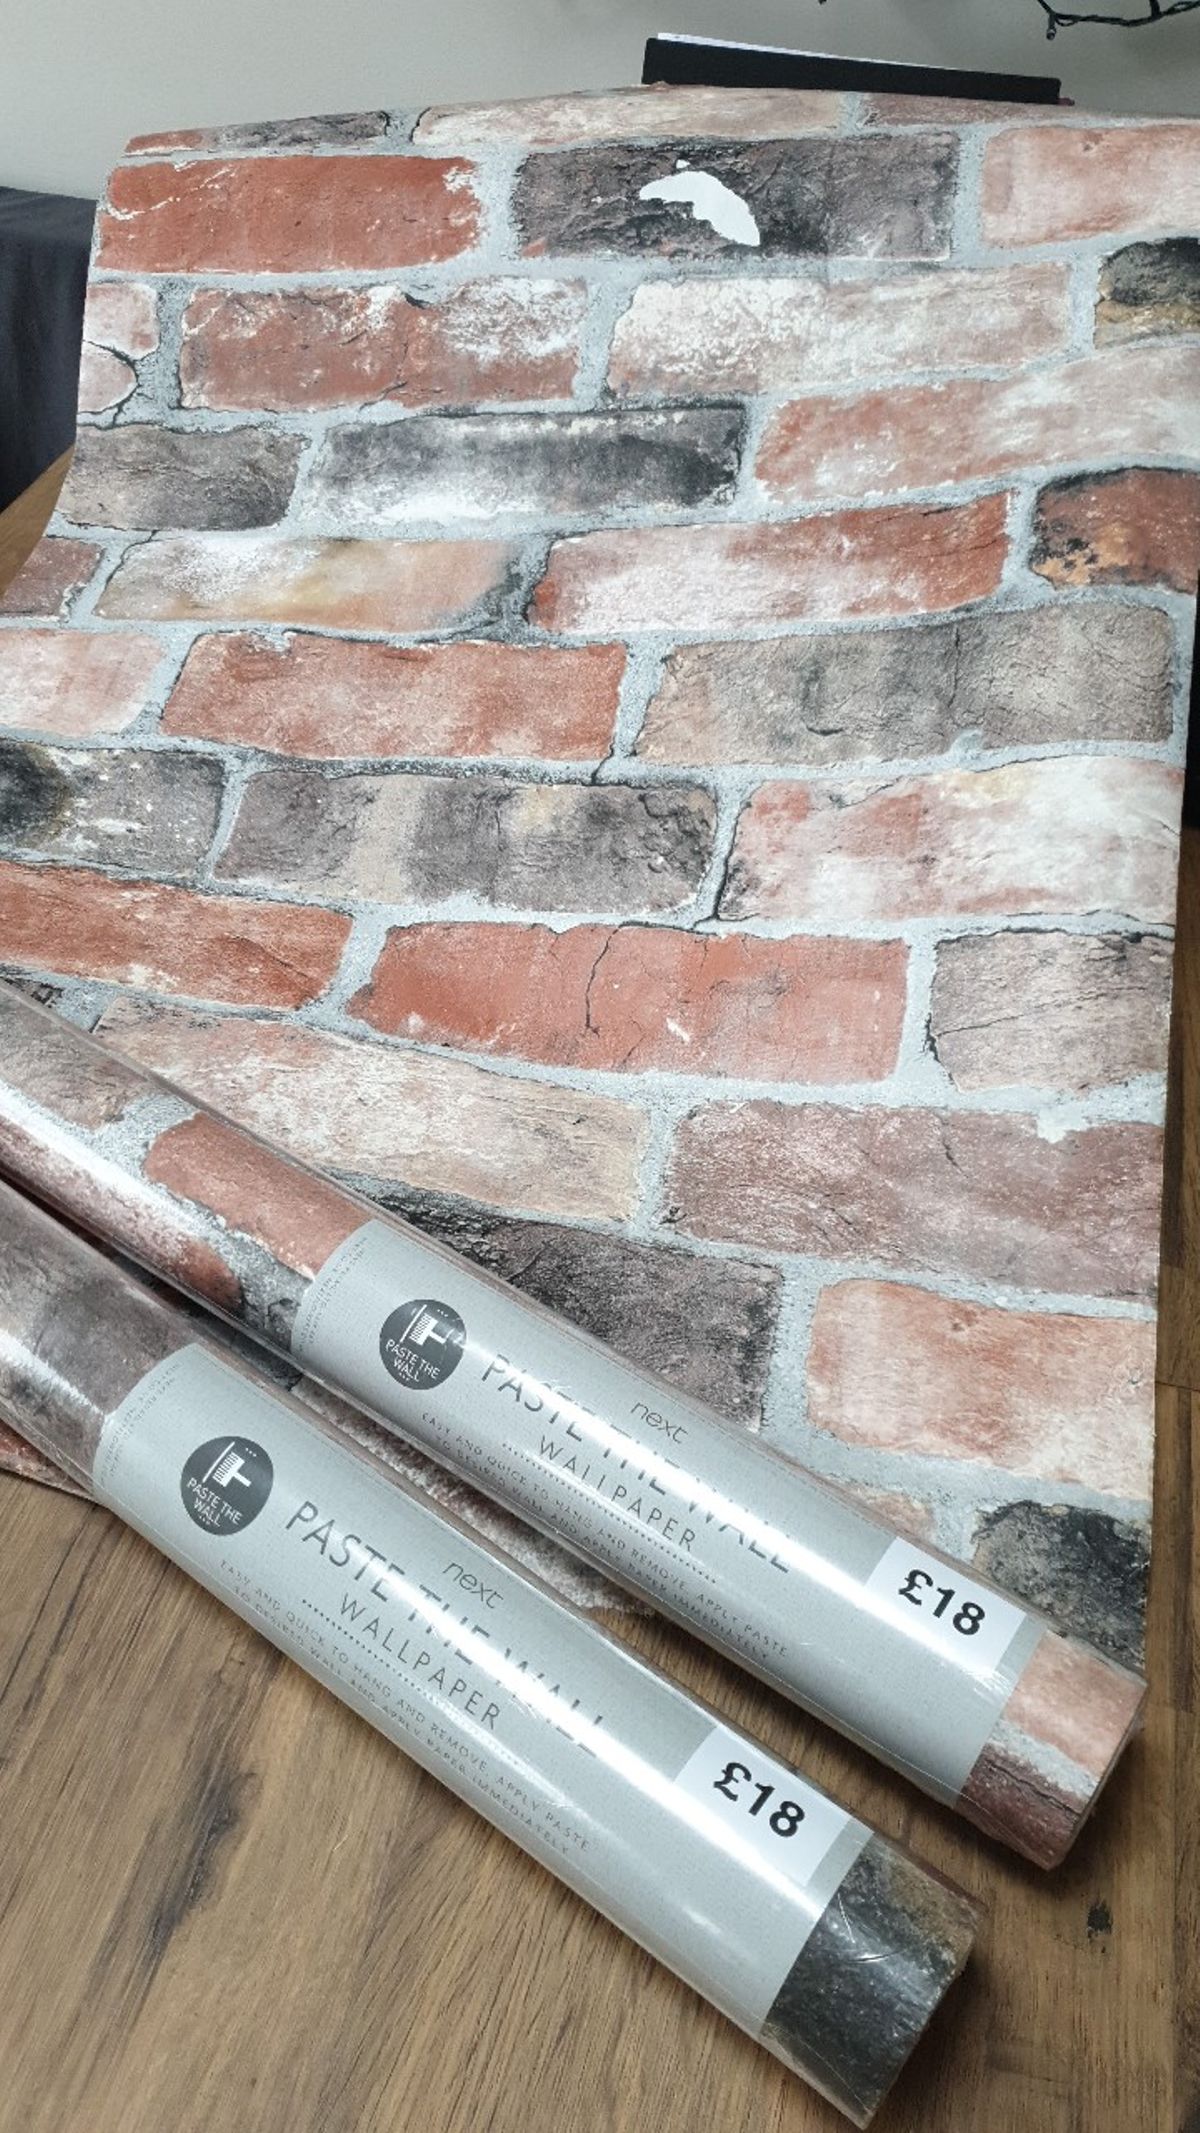 New Unused Sealed
collection
can Deliver If Local To - Brickwork , HD Wallpaper & Backgrounds